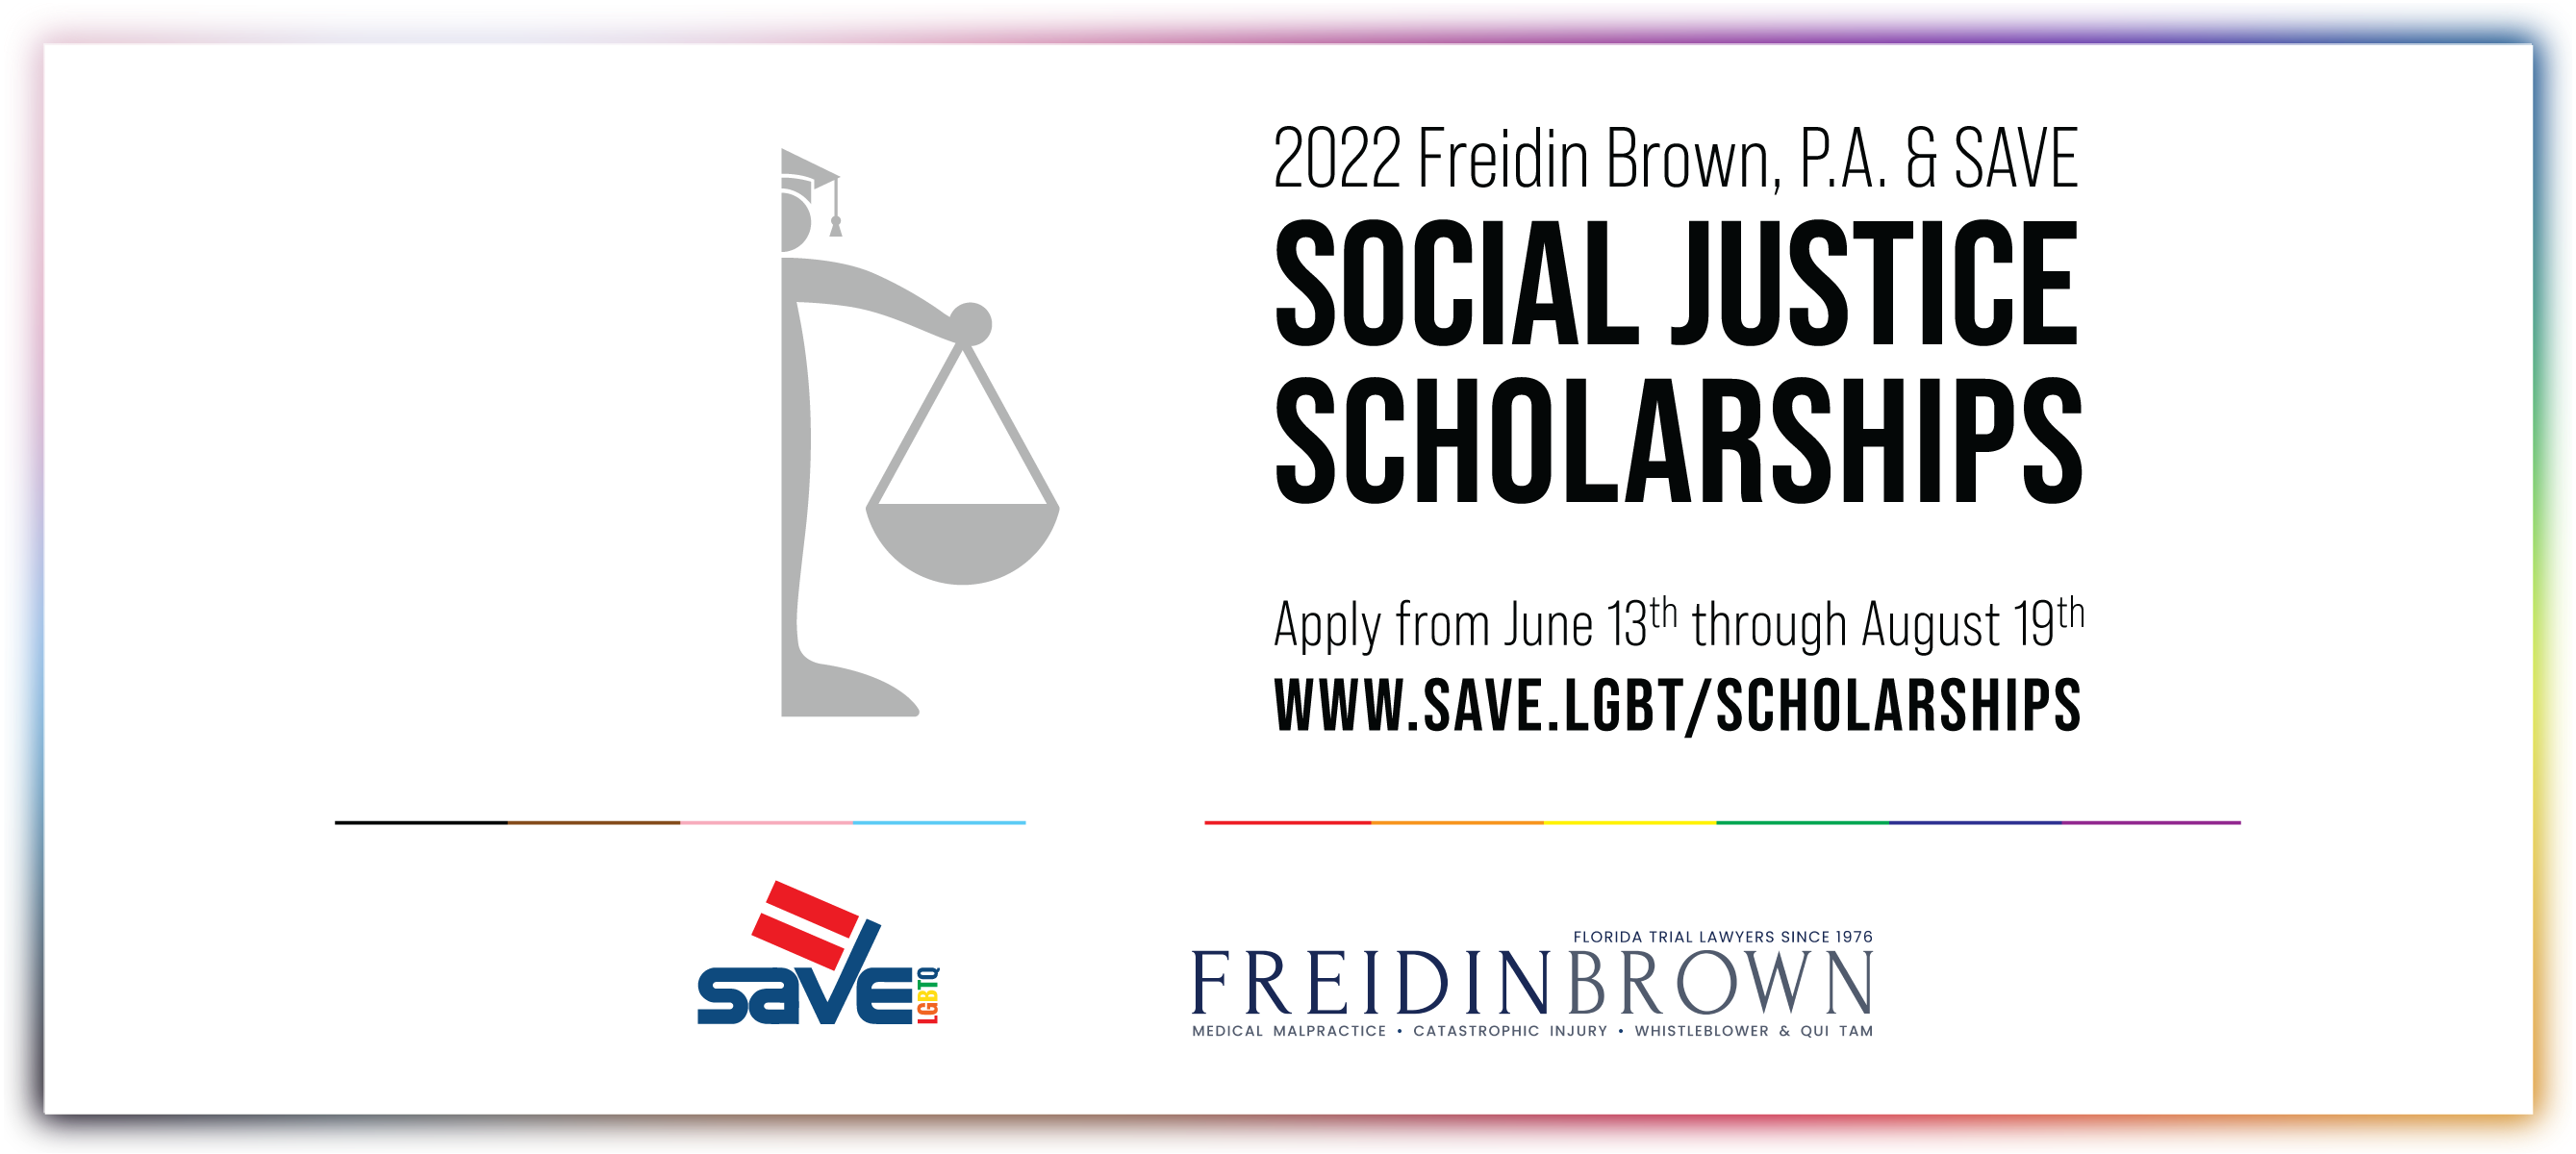 Freidin Brown, P.A. & SAVE Social Justice Scholarships